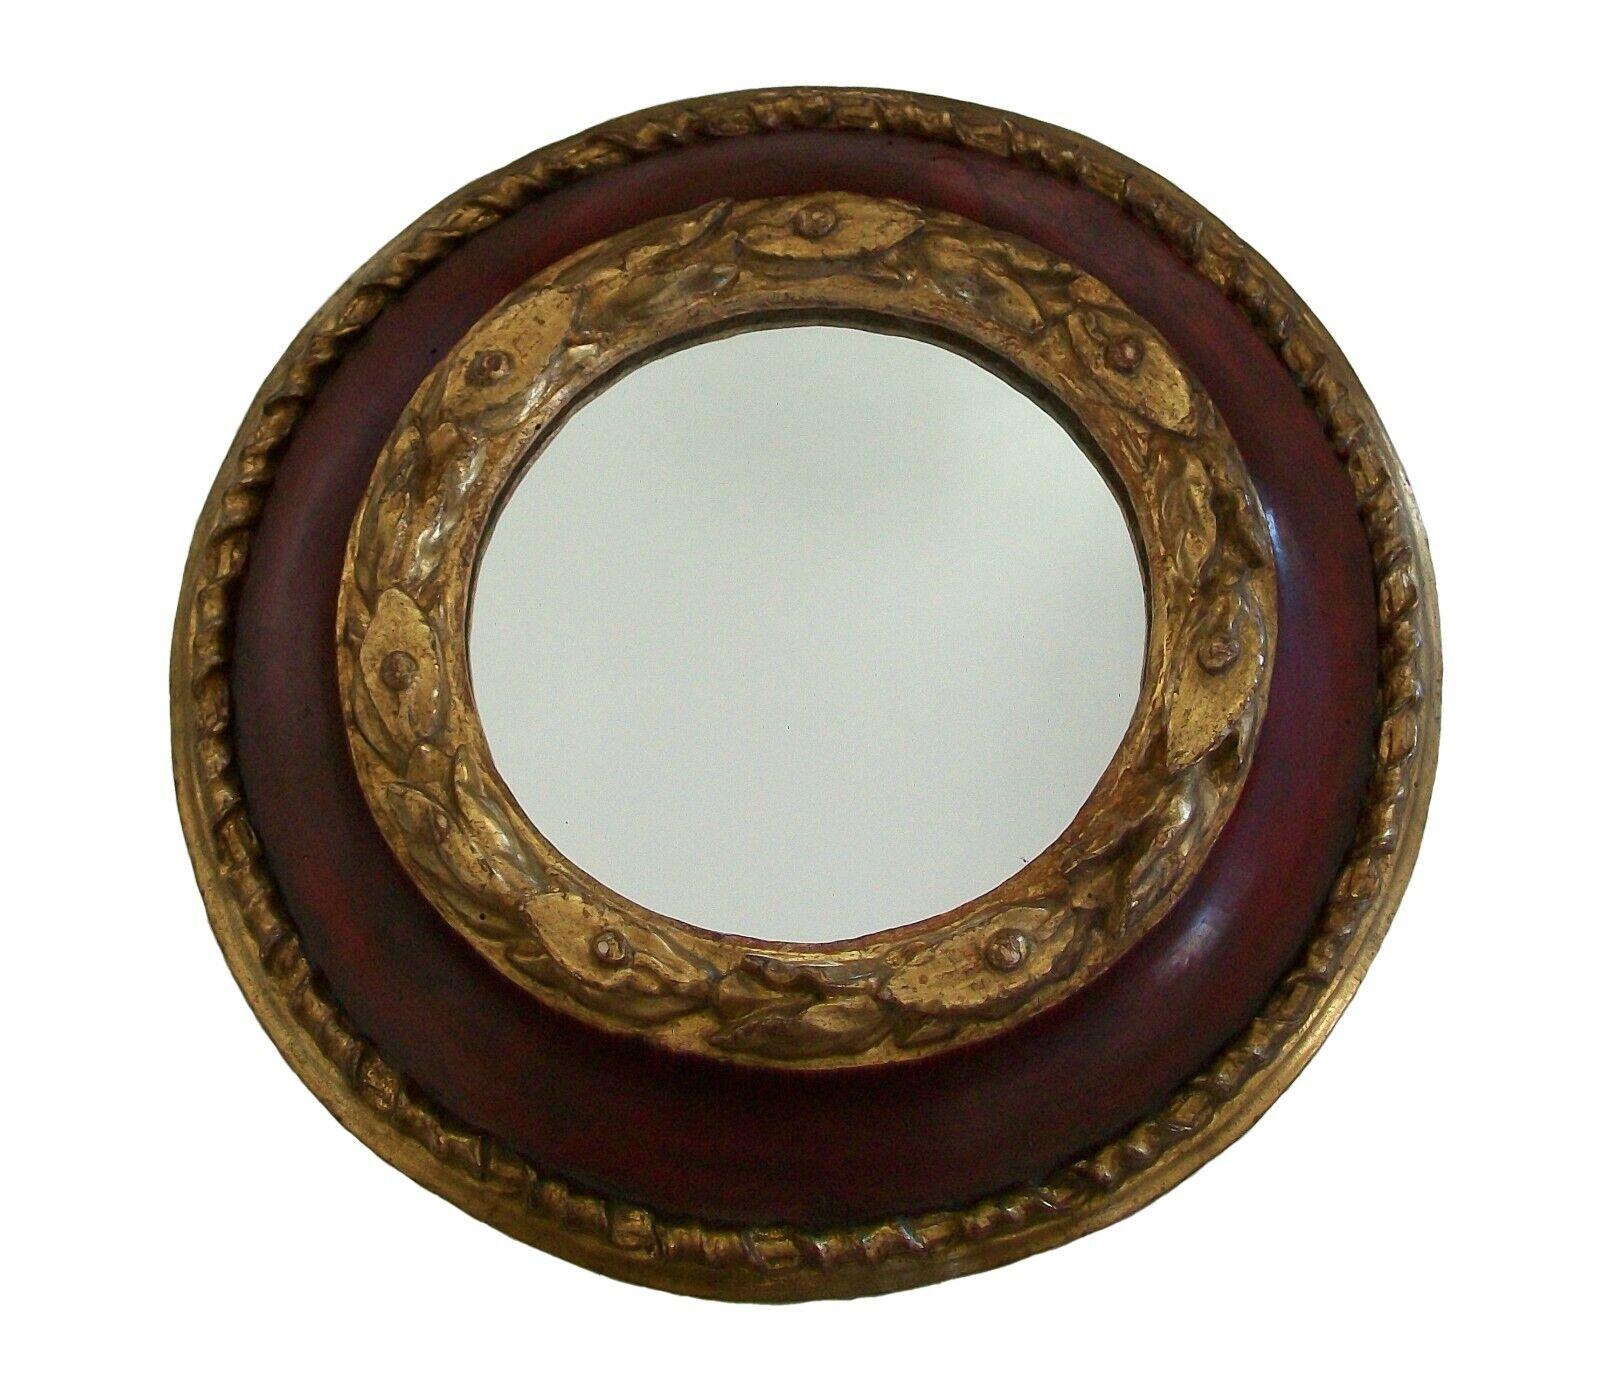 Baroque style Florentine painted and giltwood picture or mirror frame - expertly hand carved from one solid piece of wood - featuring robust gilded laurel leaf carving to the raised front - surrounded by red lacquer to the curving sides - all